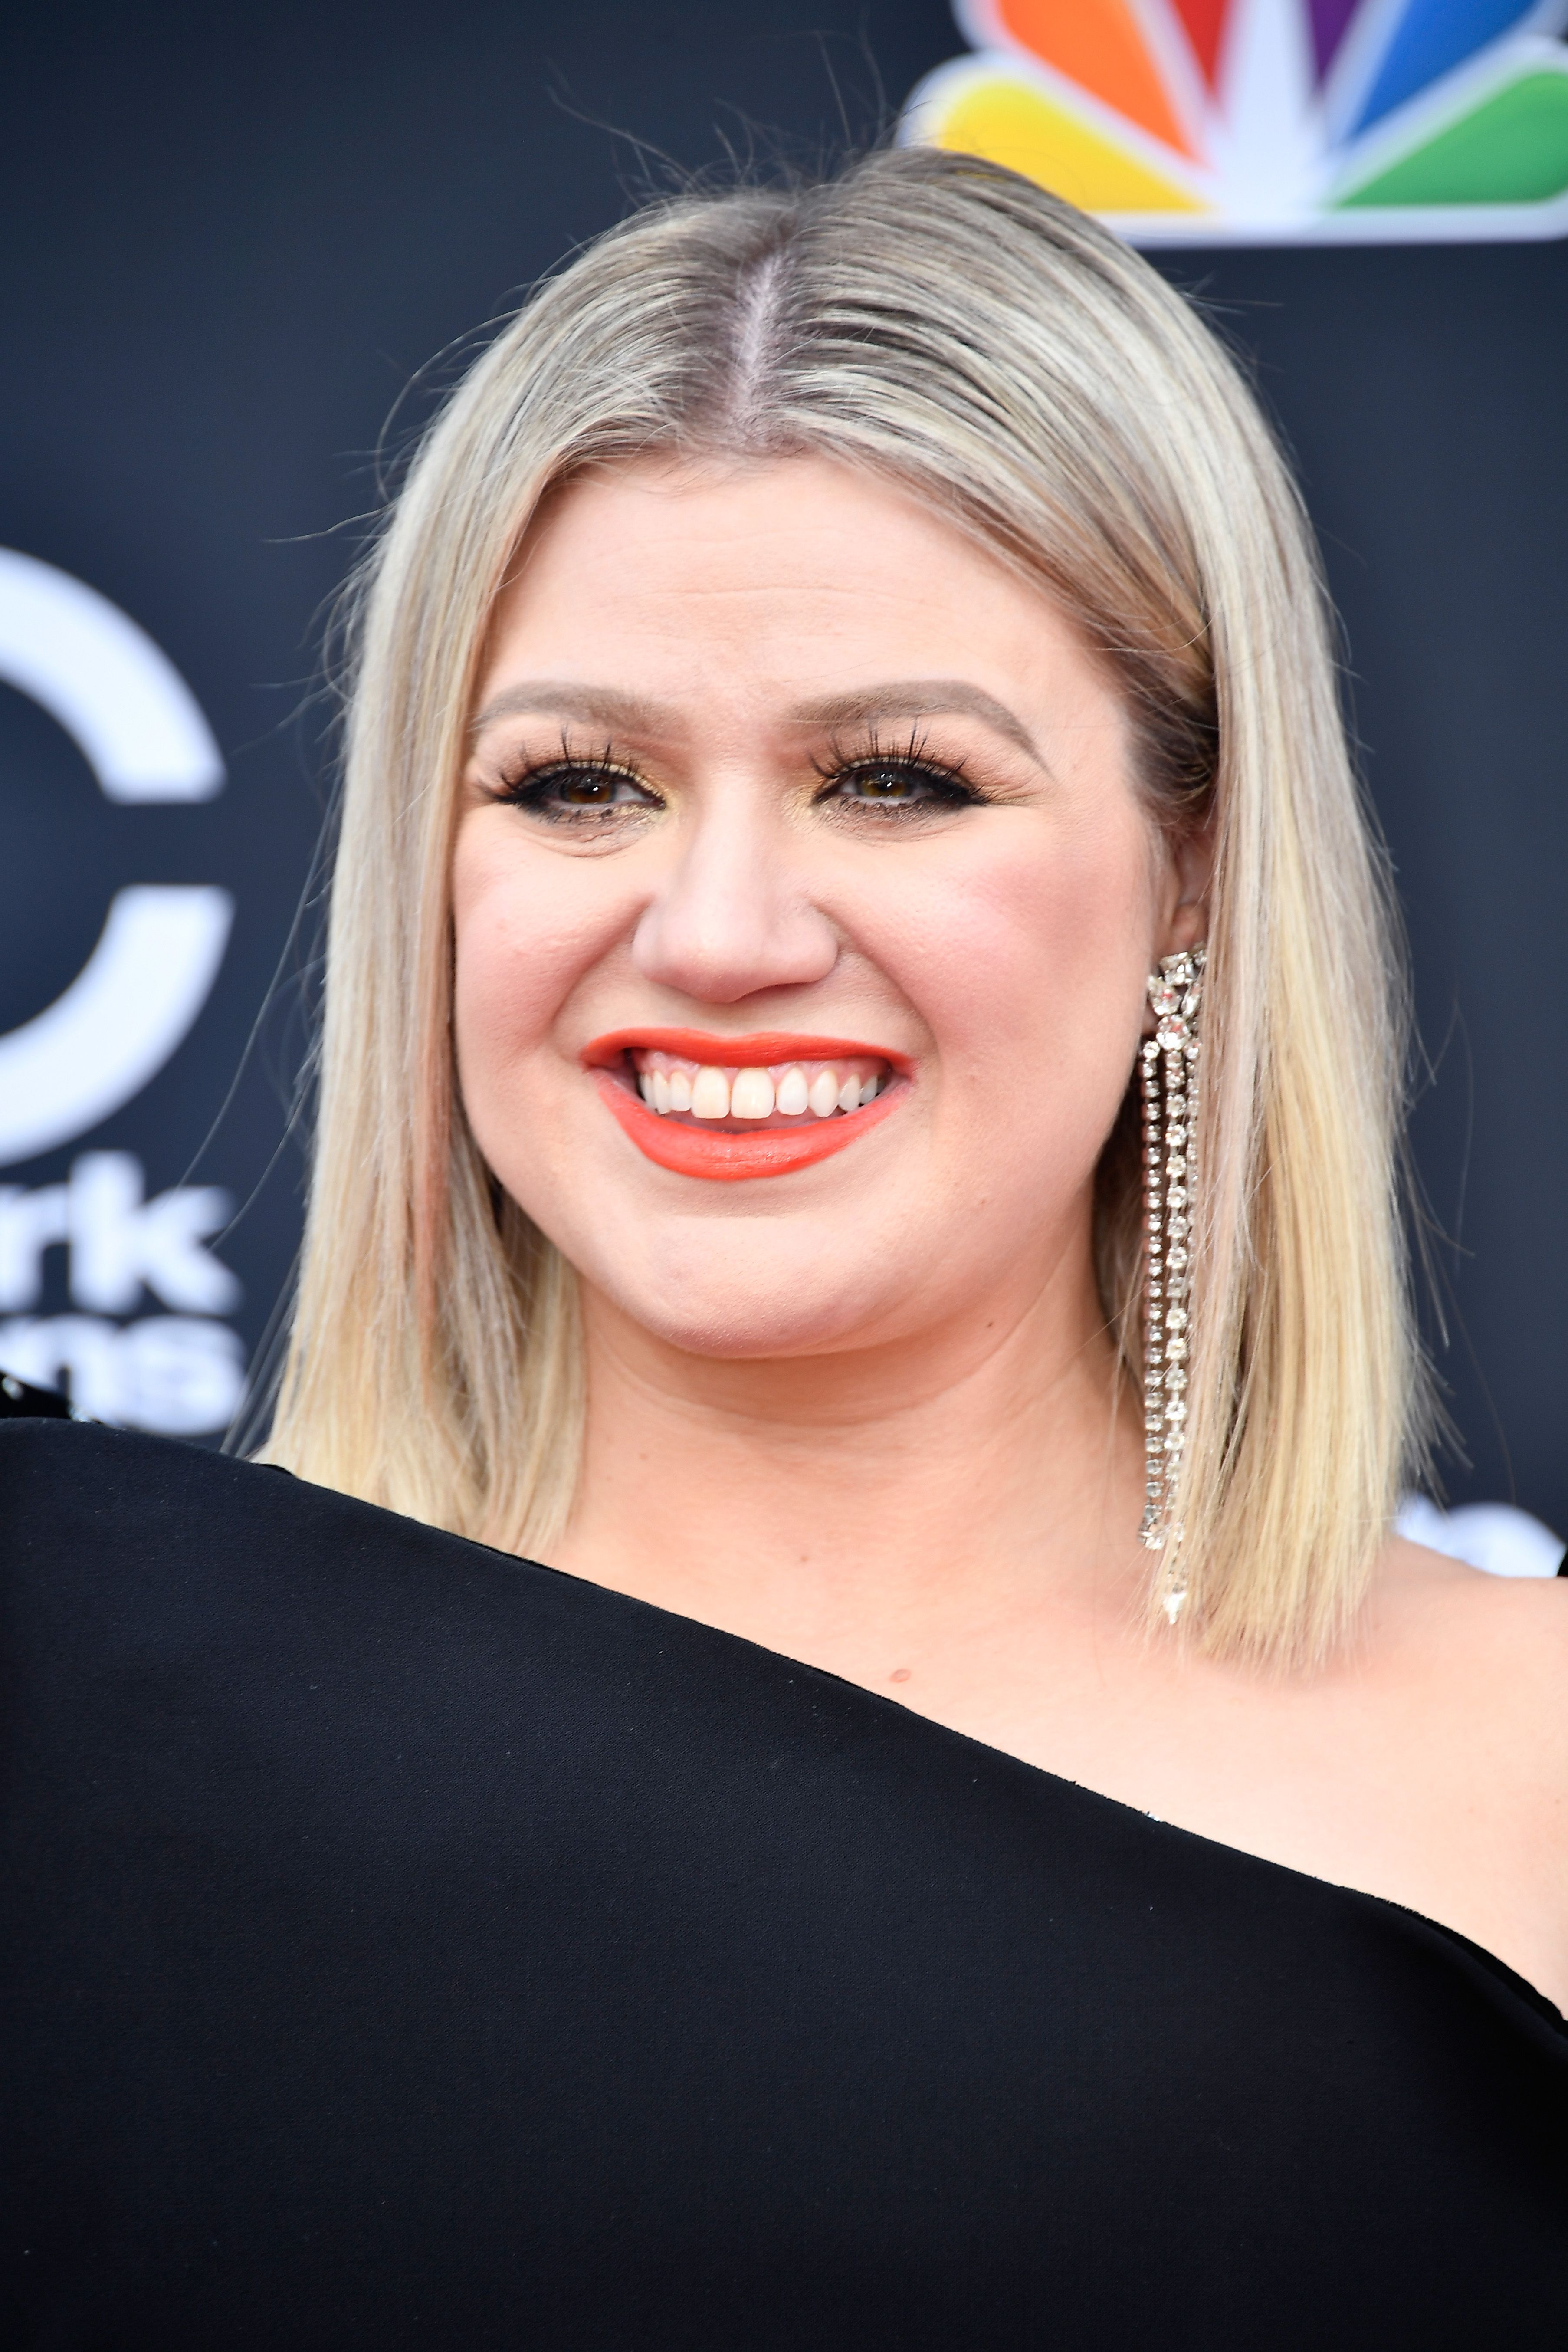 Kelly Clarkson at the 2018 Billboard Music Awards at MGM Grand Garden Arena on May 20, 2018 in Las Vegas, Nevada | Photo: Getty Images